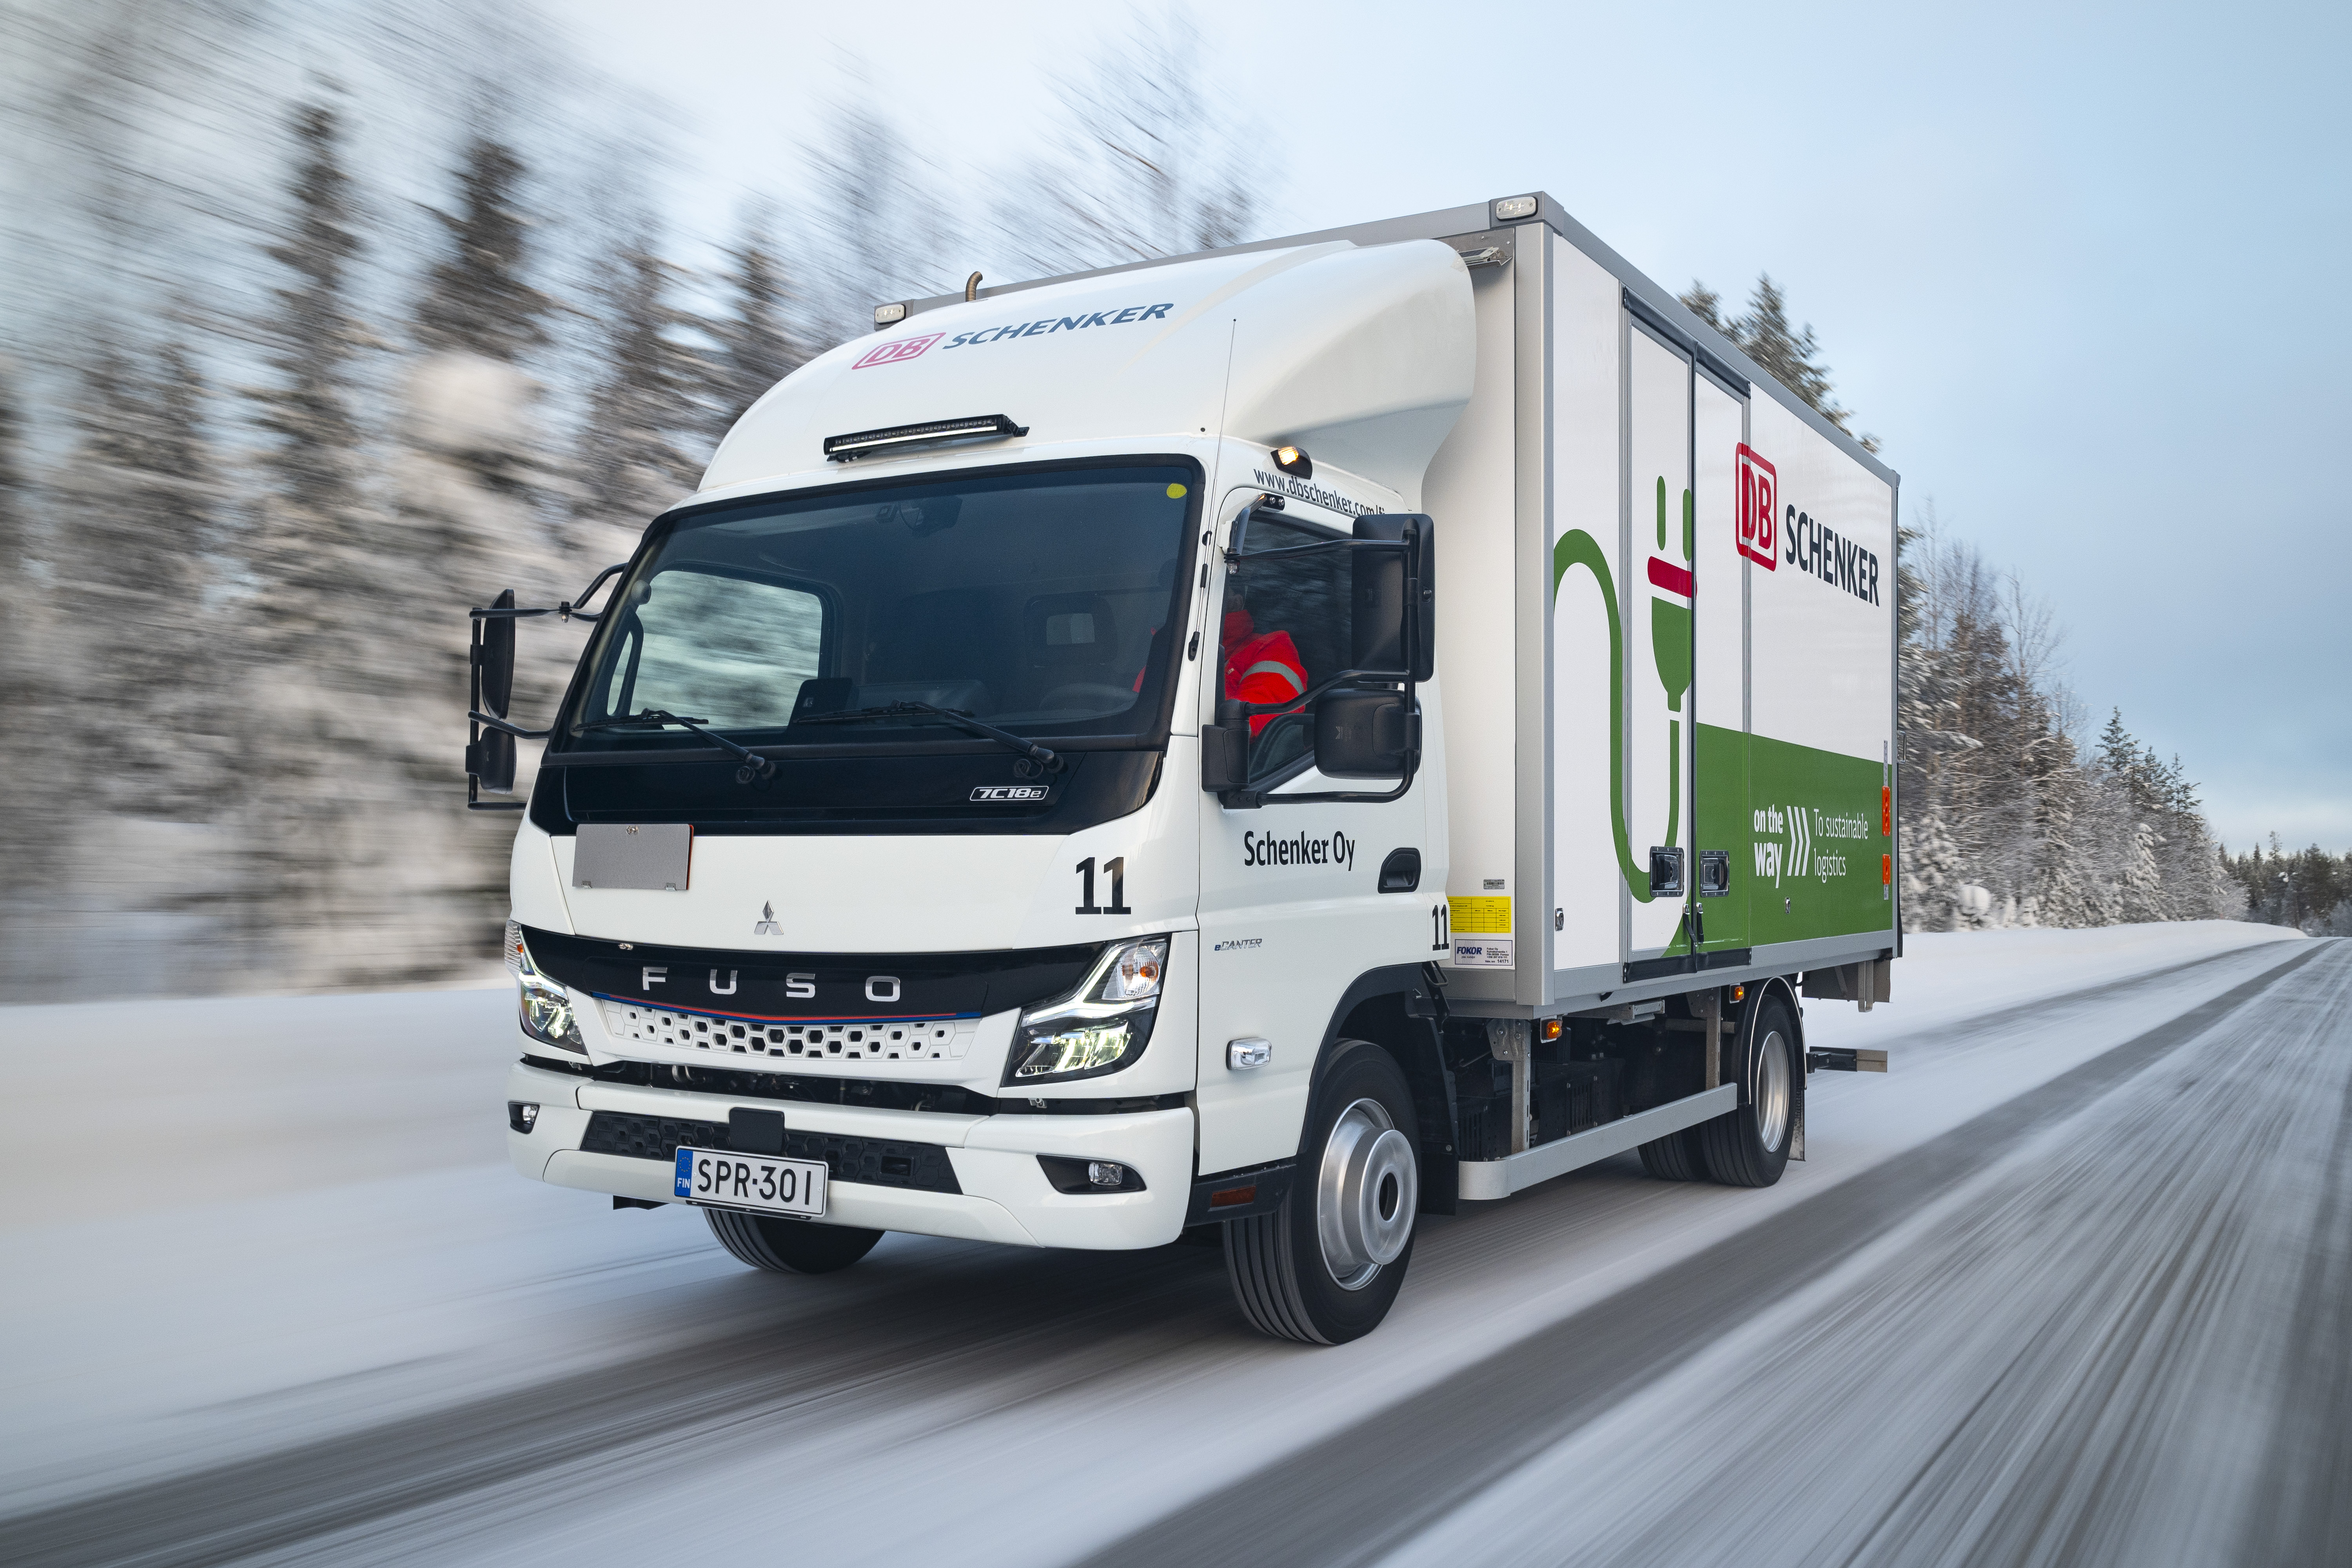 FUSO eCanters Operate in Icy Northern Finland, Proving Cold-weather Performance